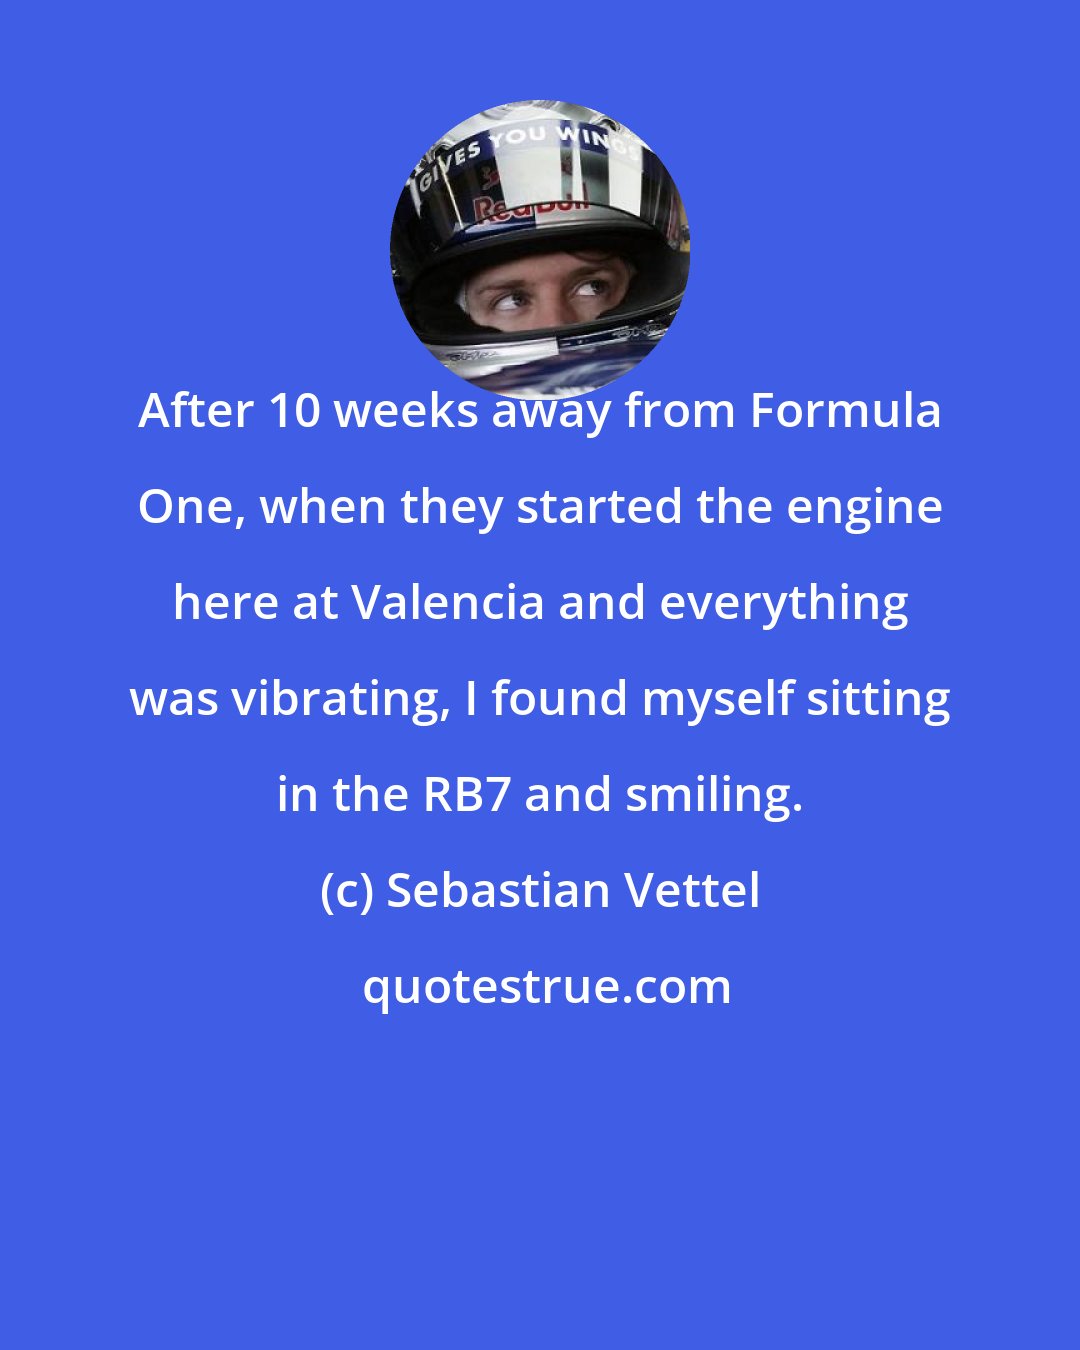 Sebastian Vettel: After 10 weeks away from Formula One, when they started the engine here at Valencia and everything was vibrating, I found myself sitting in the RB7 and smiling.